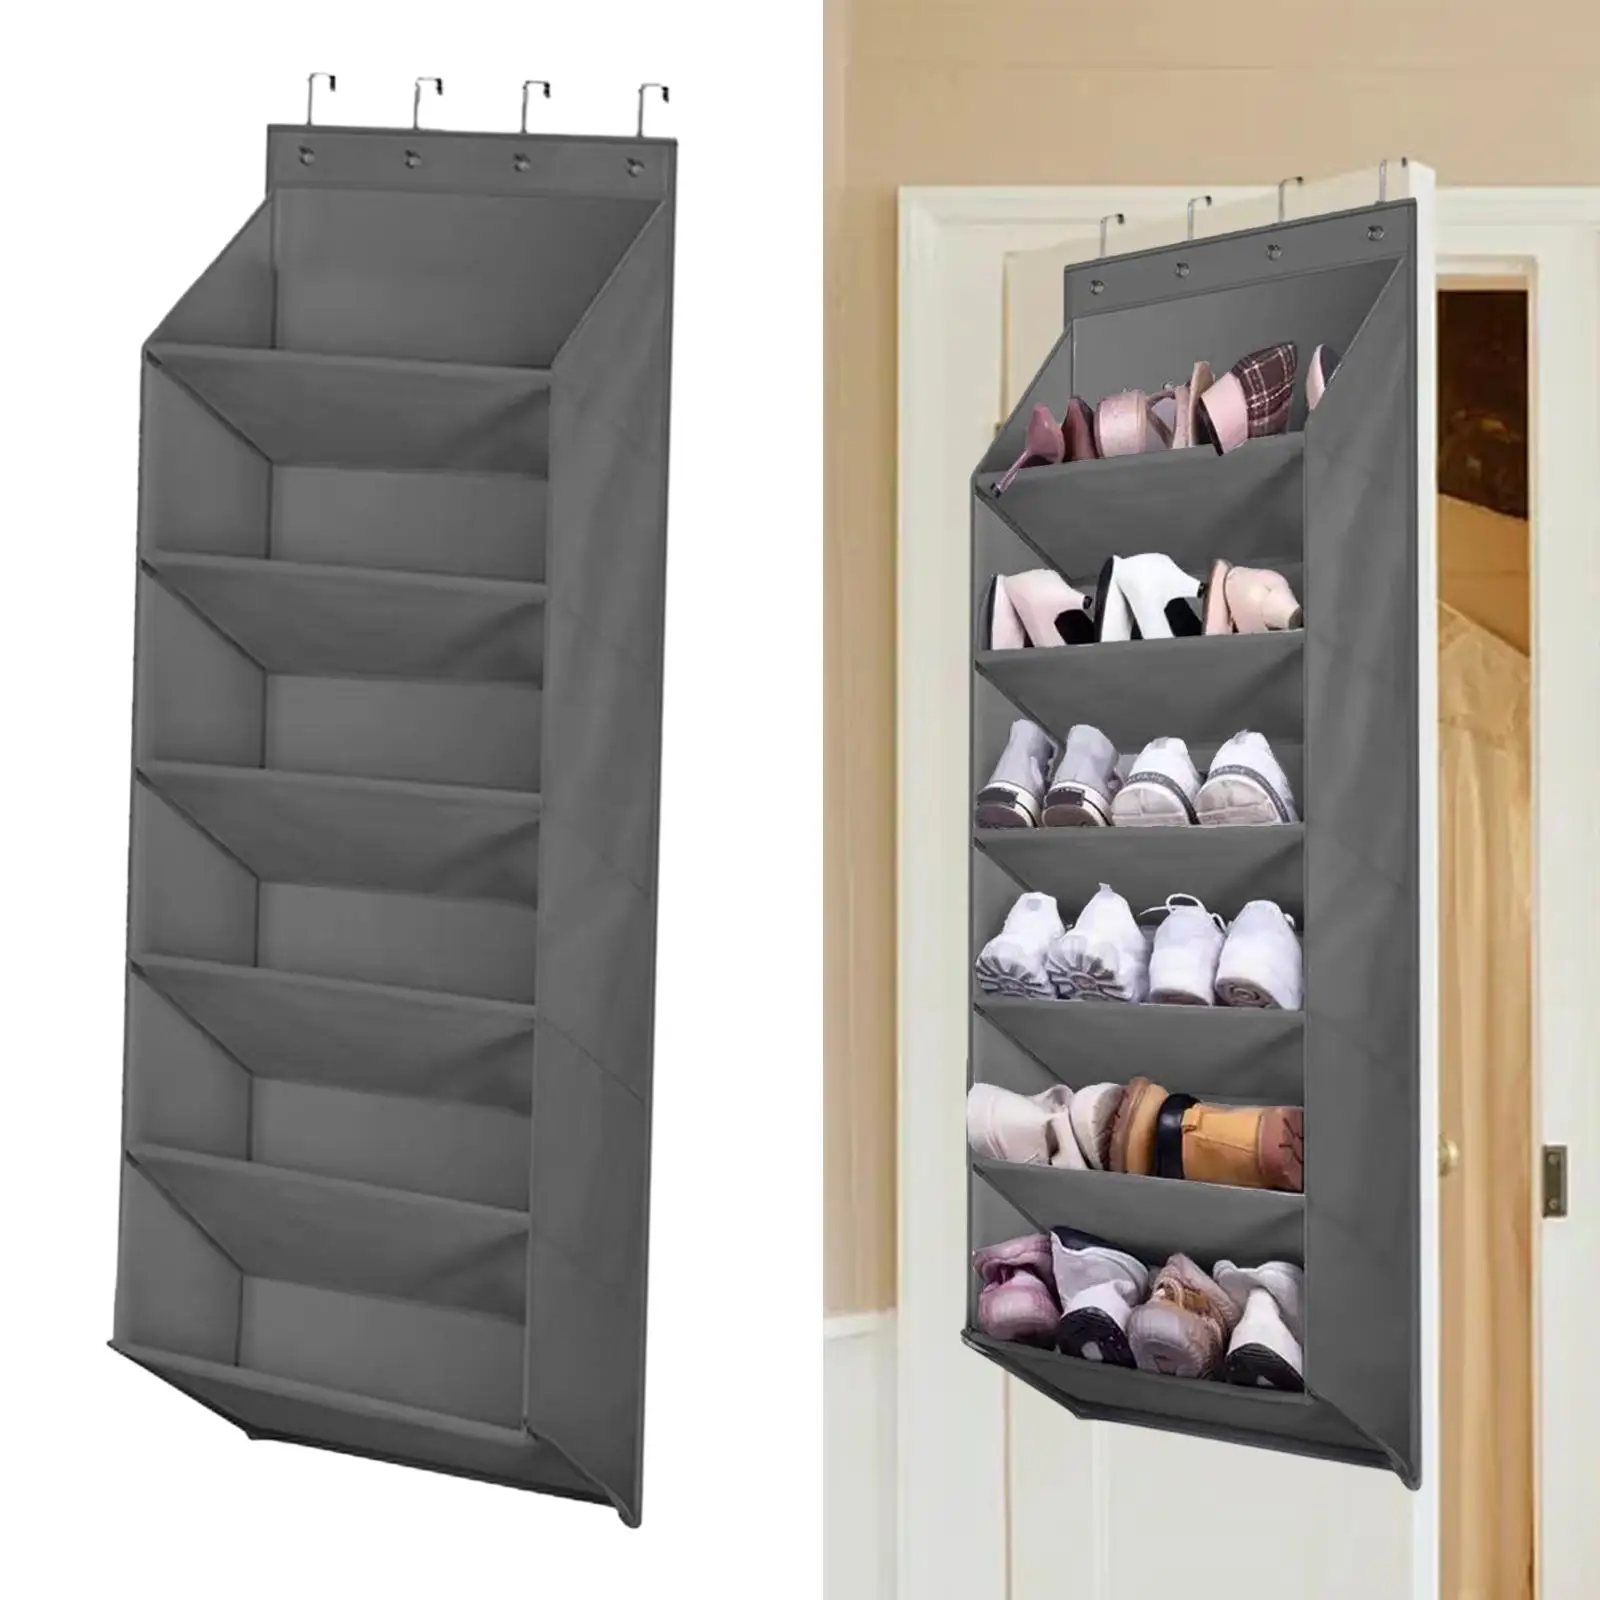 6 Tier Large Deep Pockets Door Shoe Rack with 4 Hooks Hanging Storage Bag for Closet Door for Toys 16 Pair Shoes Hats Baby Items